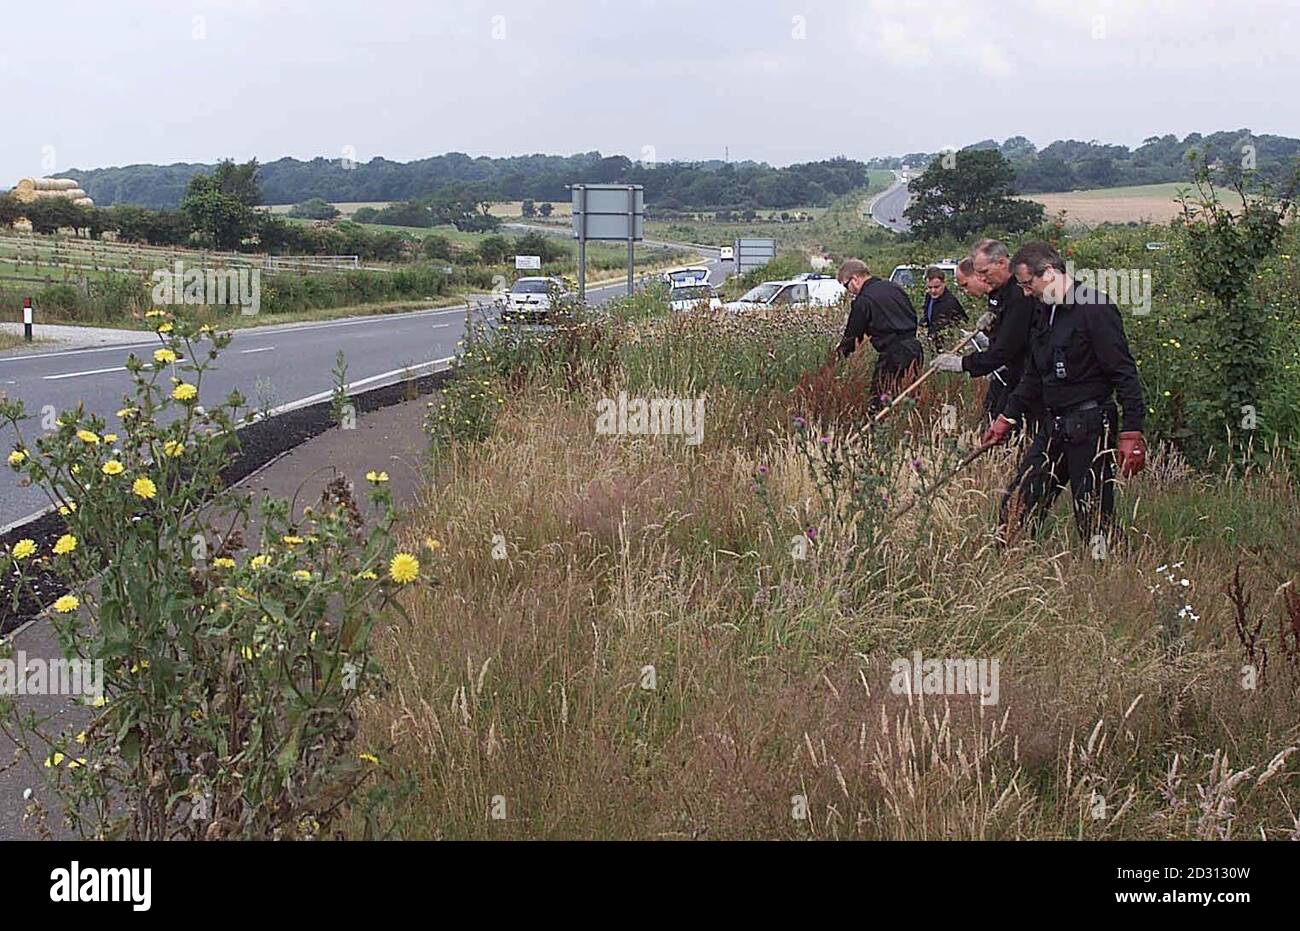 Sussex Police continue the search along the busy A24 for missing eight year old Sarah Payne, one of the main routes between Worthing and London. Sarah disappeared while playing in a corn field near her grand parent's Worthing home. Stock Photo